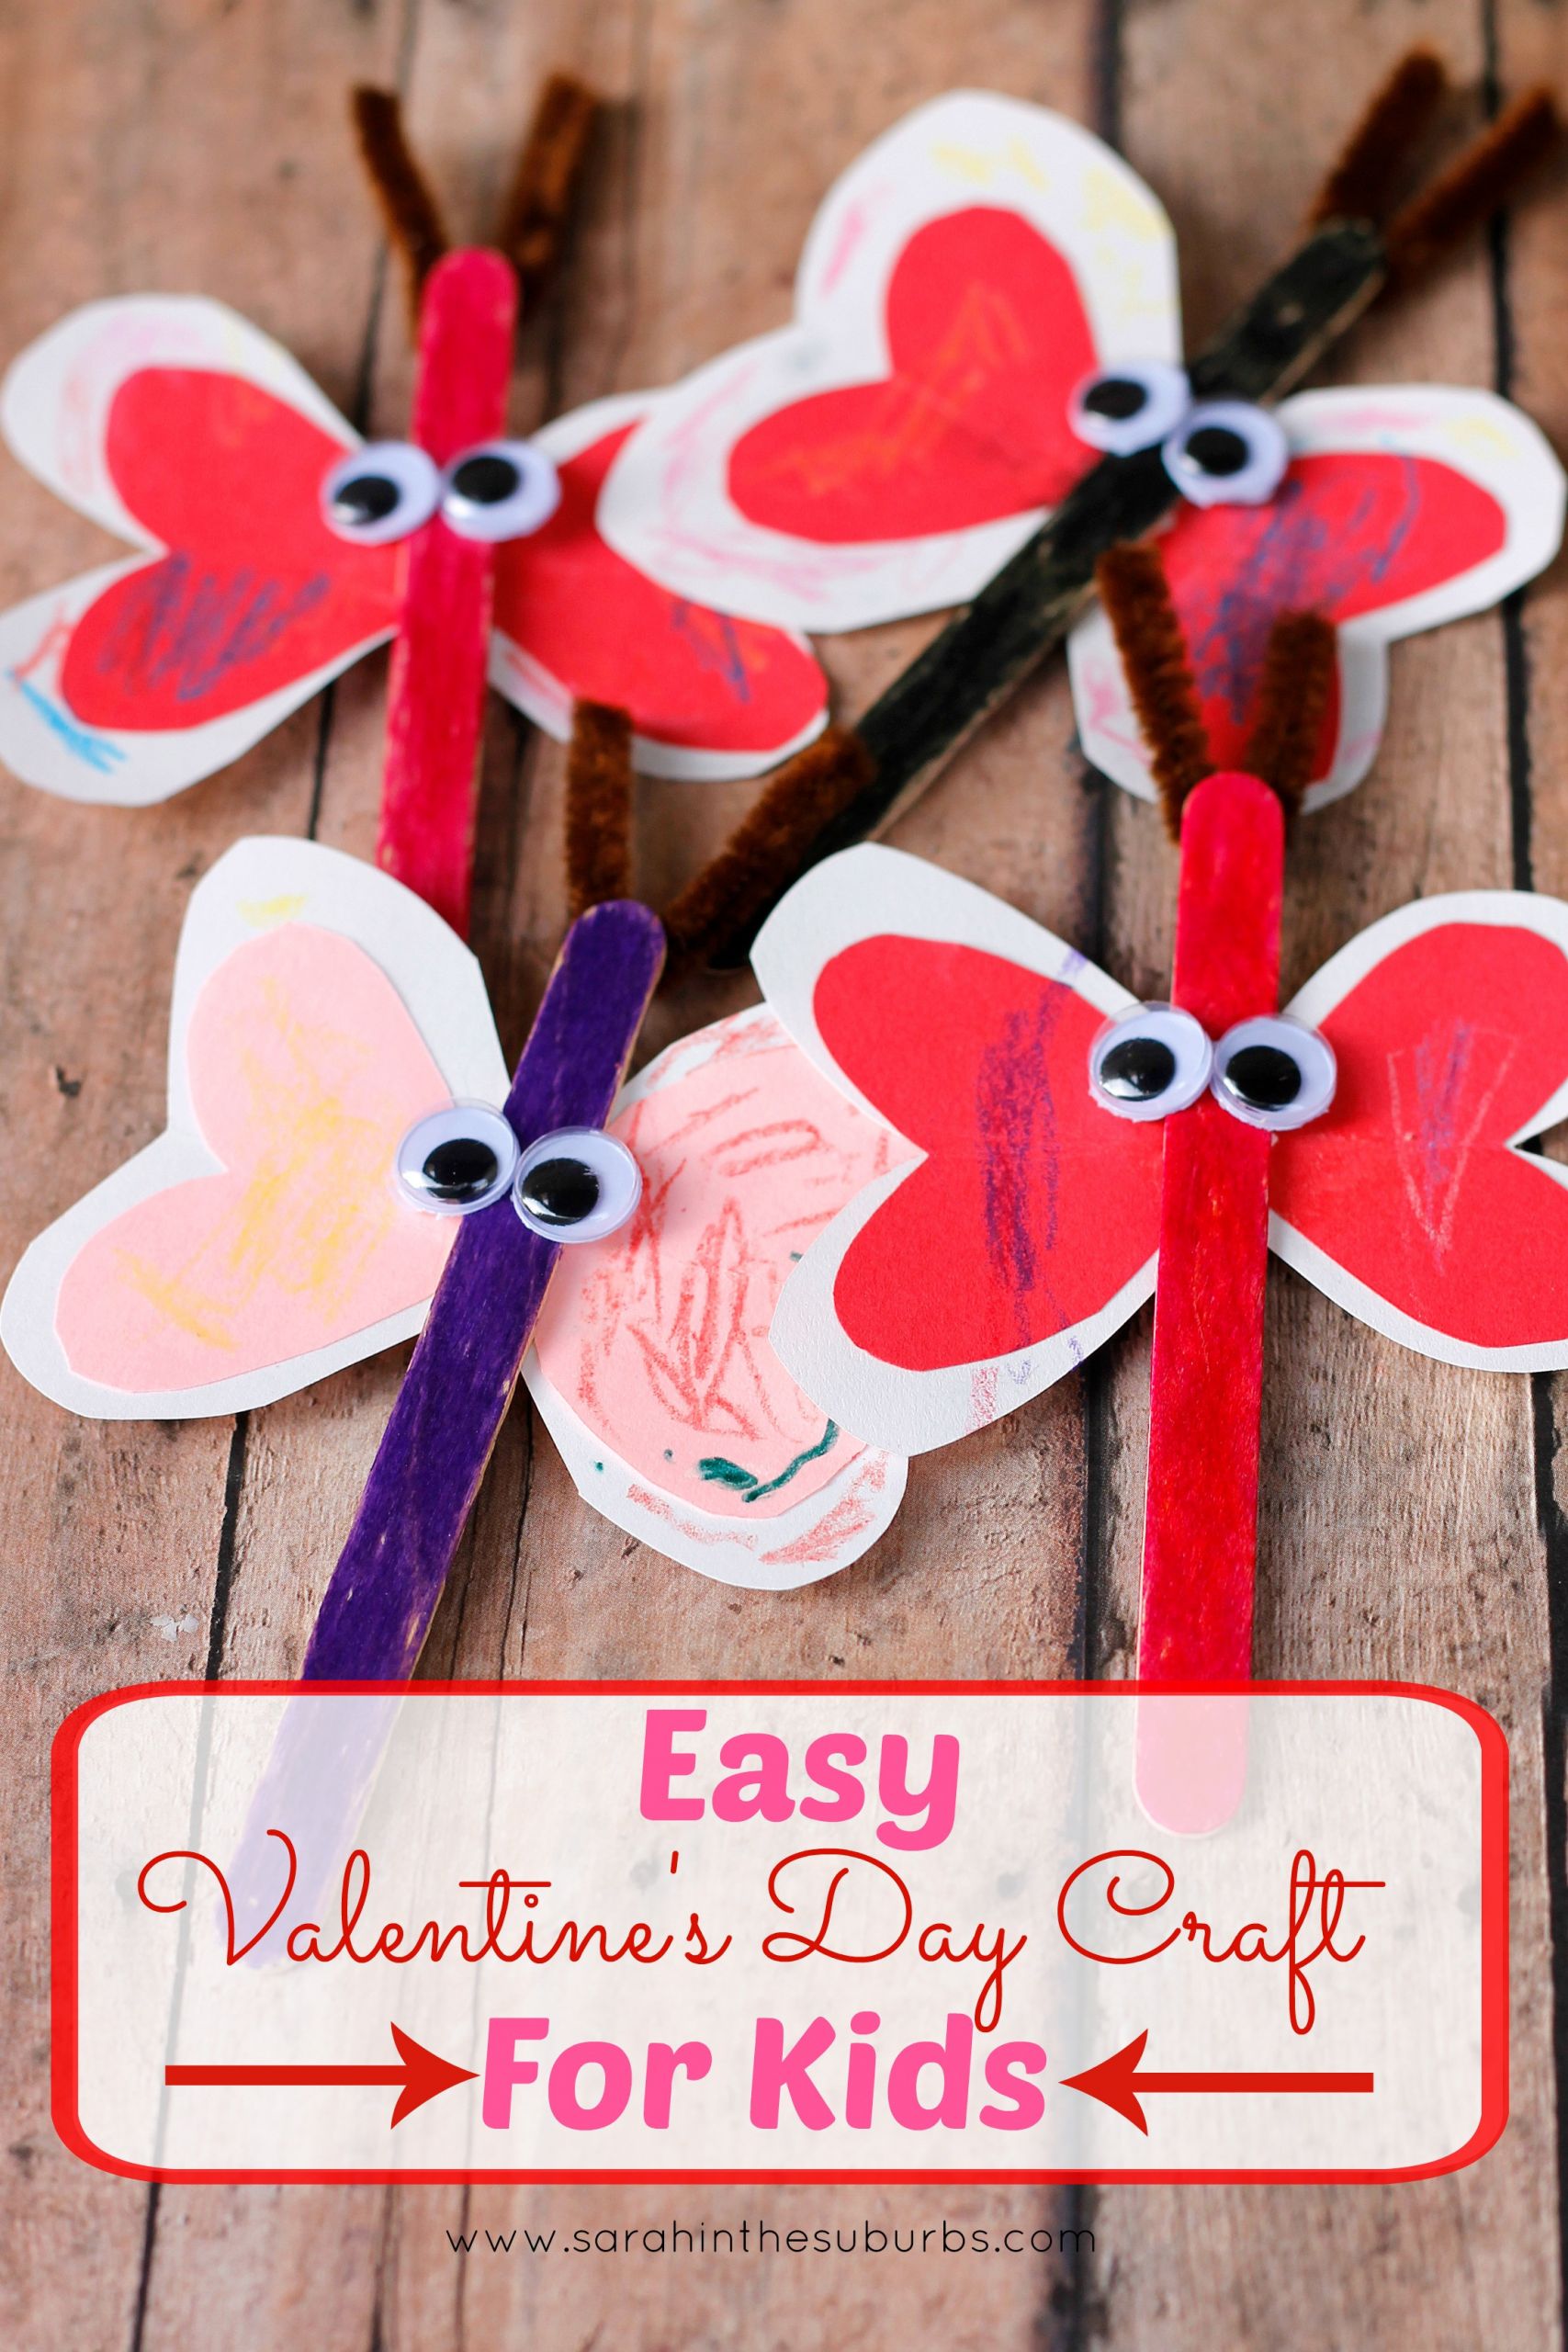 Valentine Crafts Ideas For Toddlers
 Love Bug Valentine s Day Craft for Kids Sarah in the Suburbs